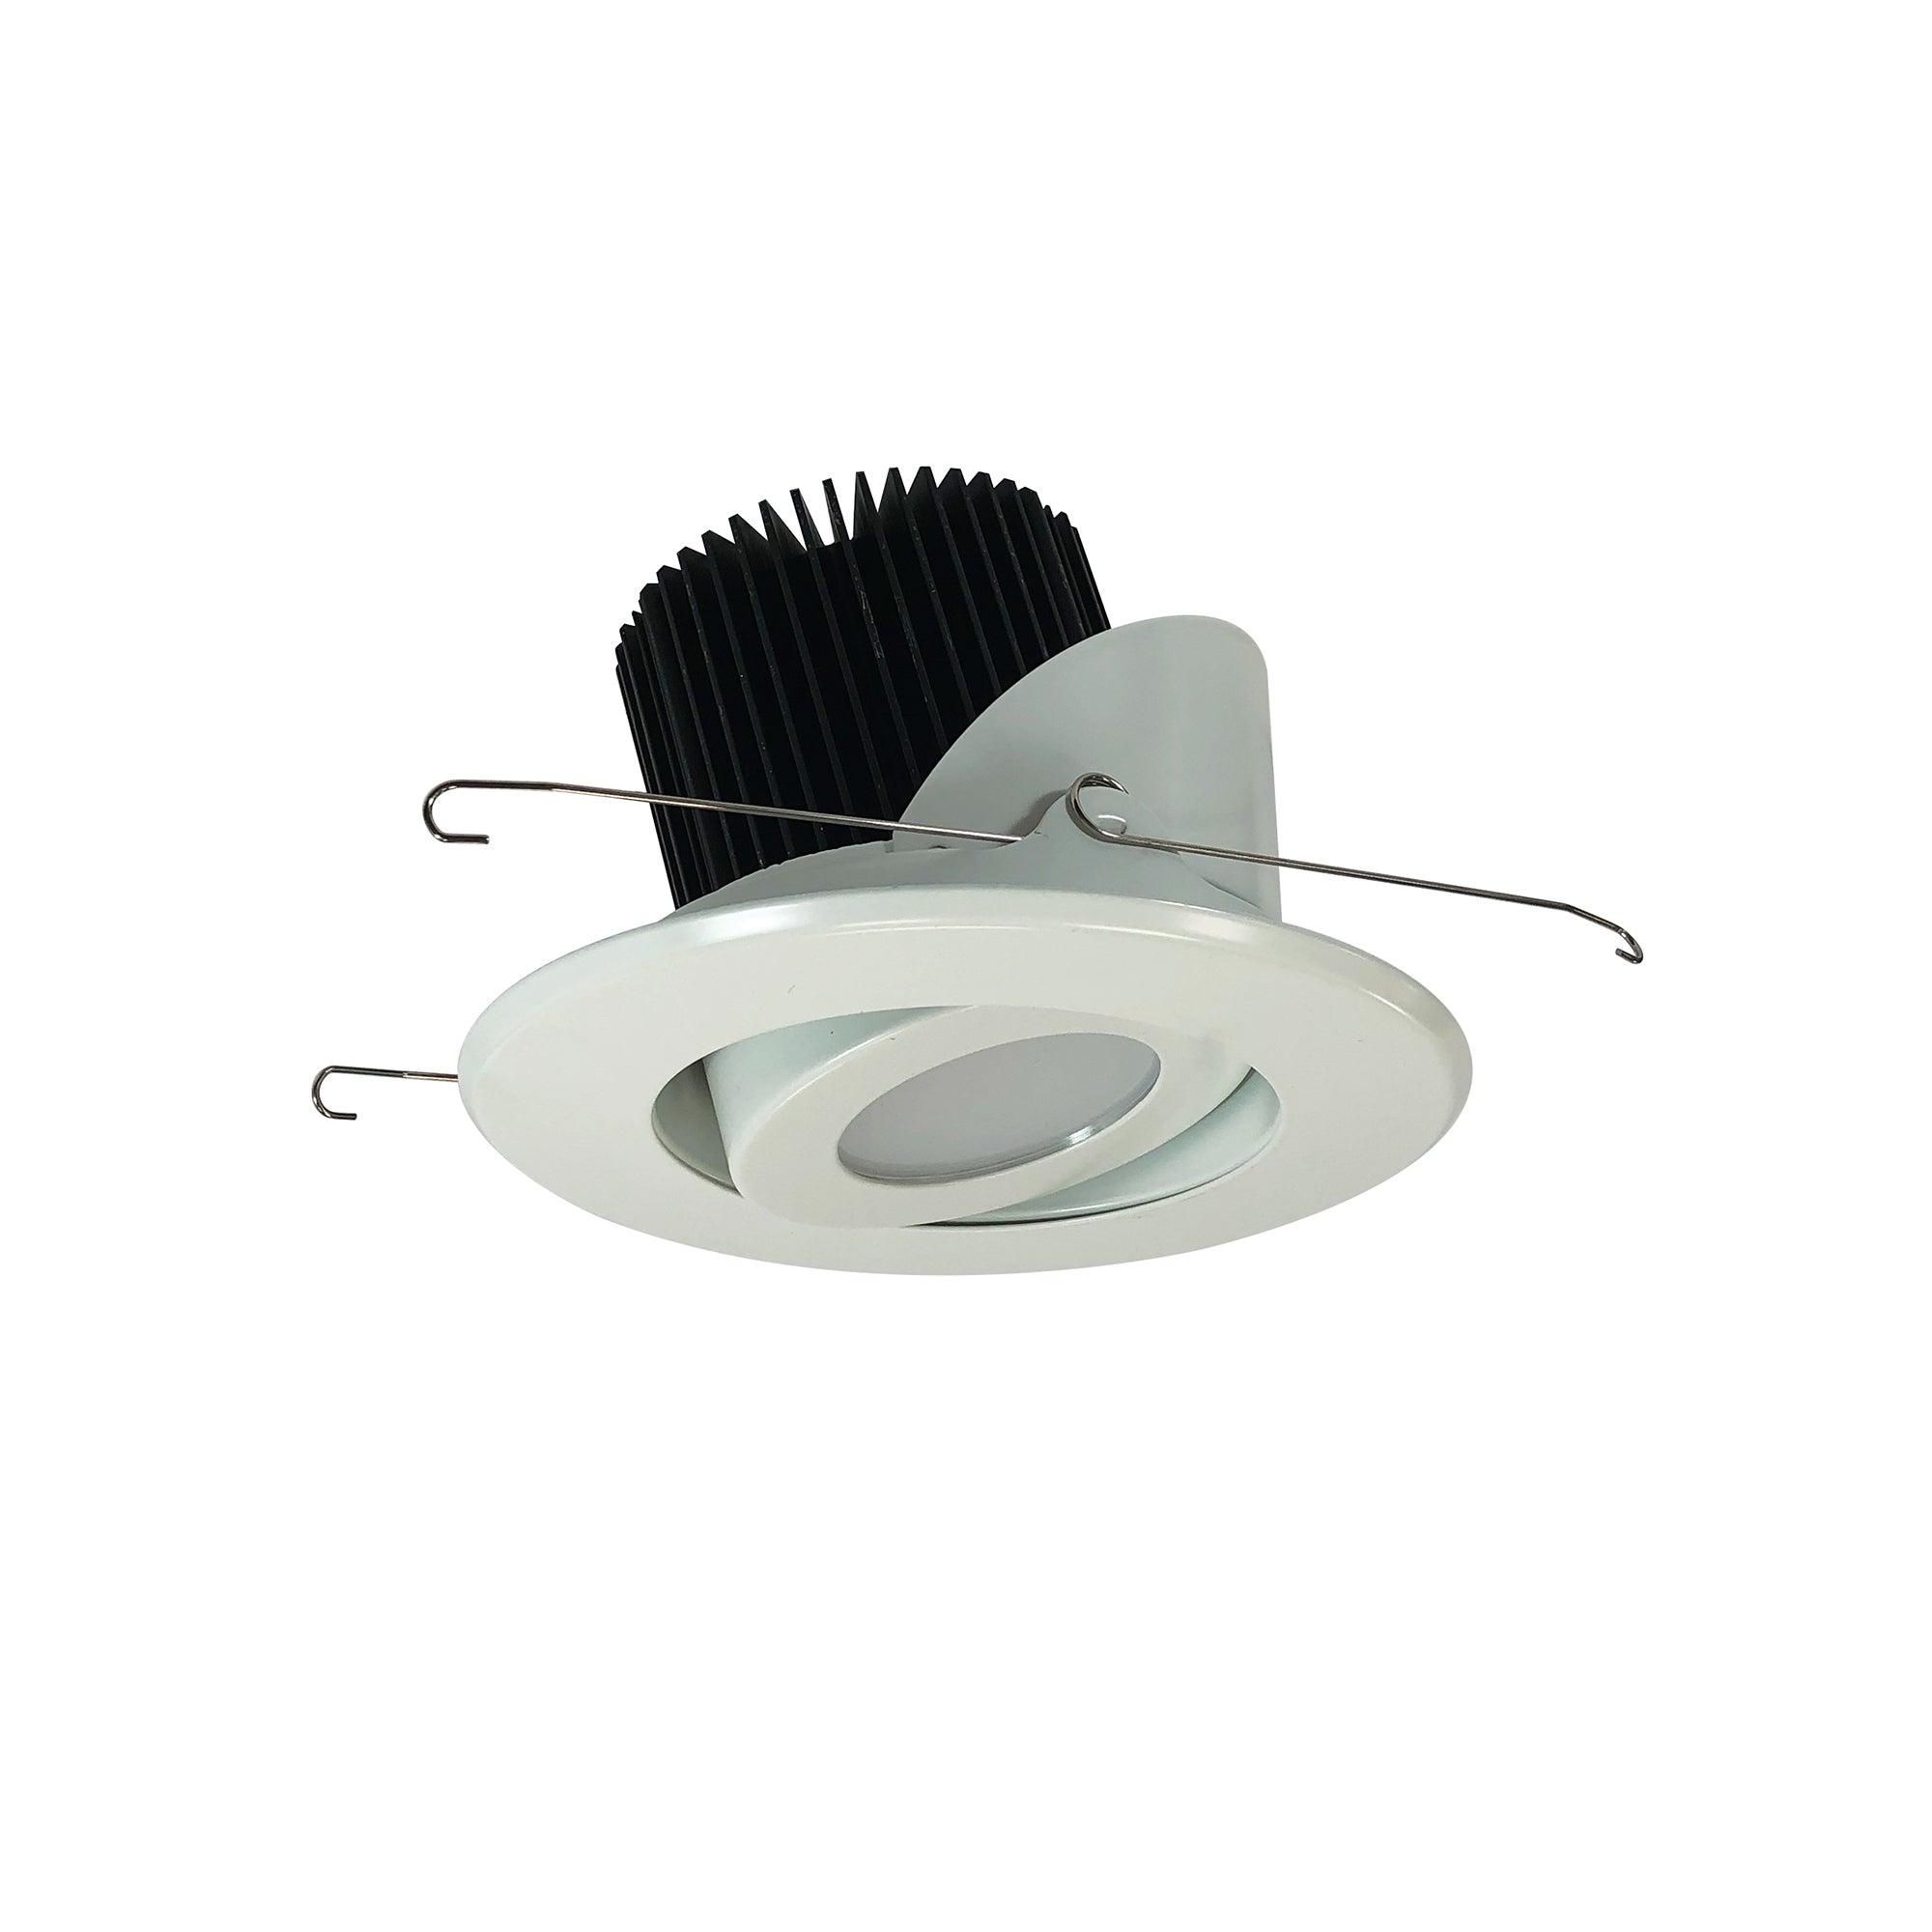 Nora Lighting LE70 - NRM2-514L1535MWW - Recessed - White